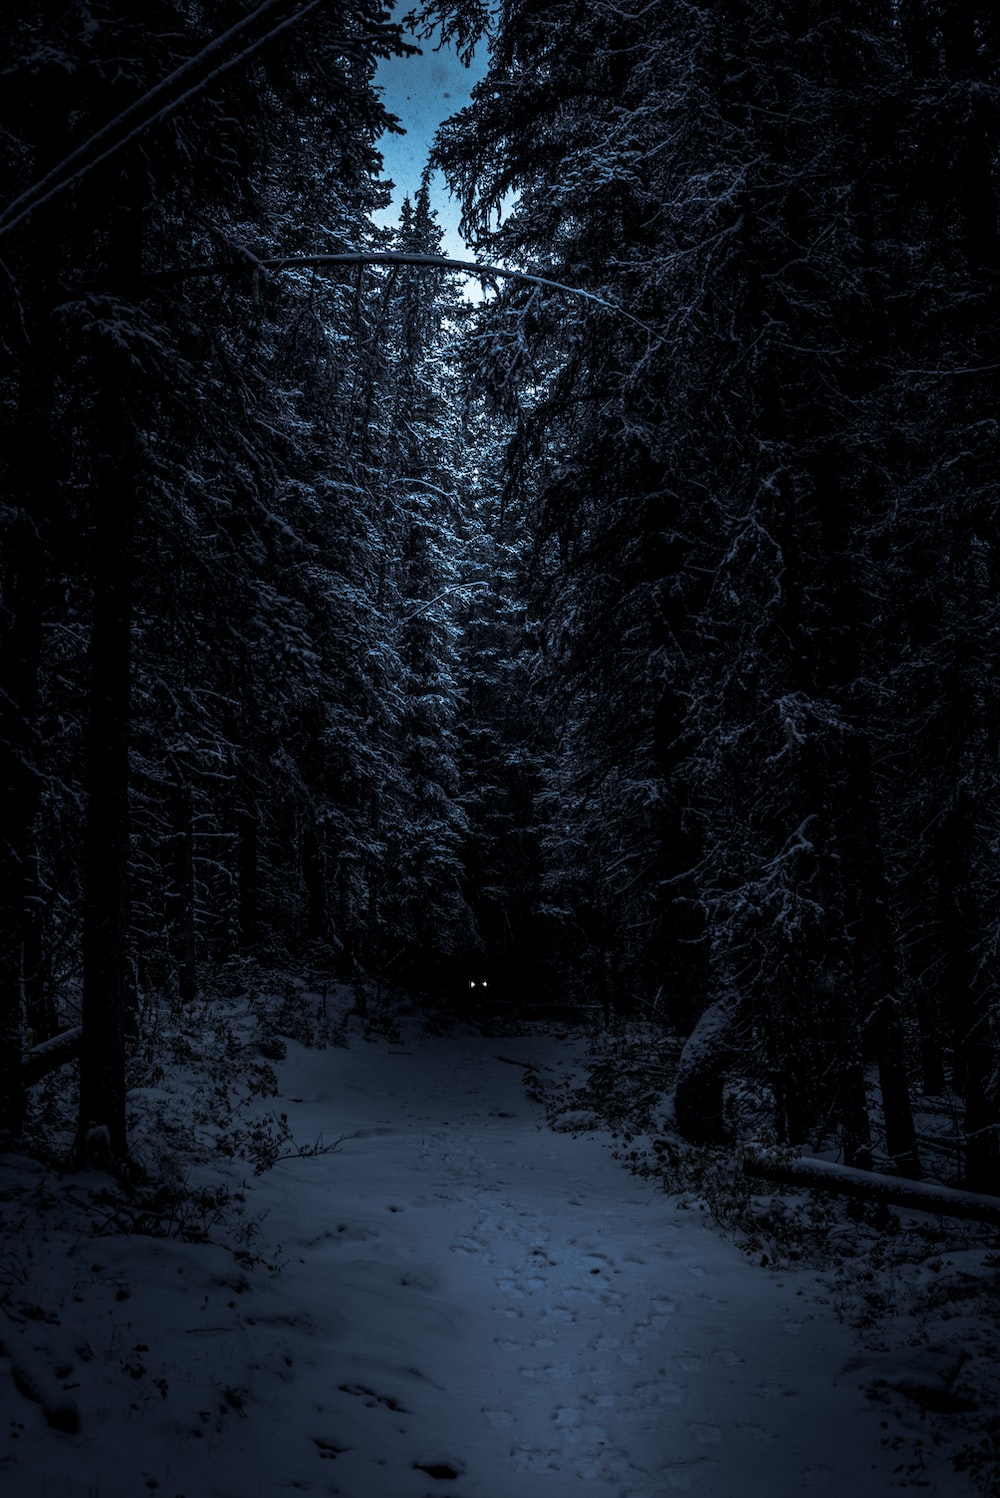 A snowy forest with trees and power lines - Forest